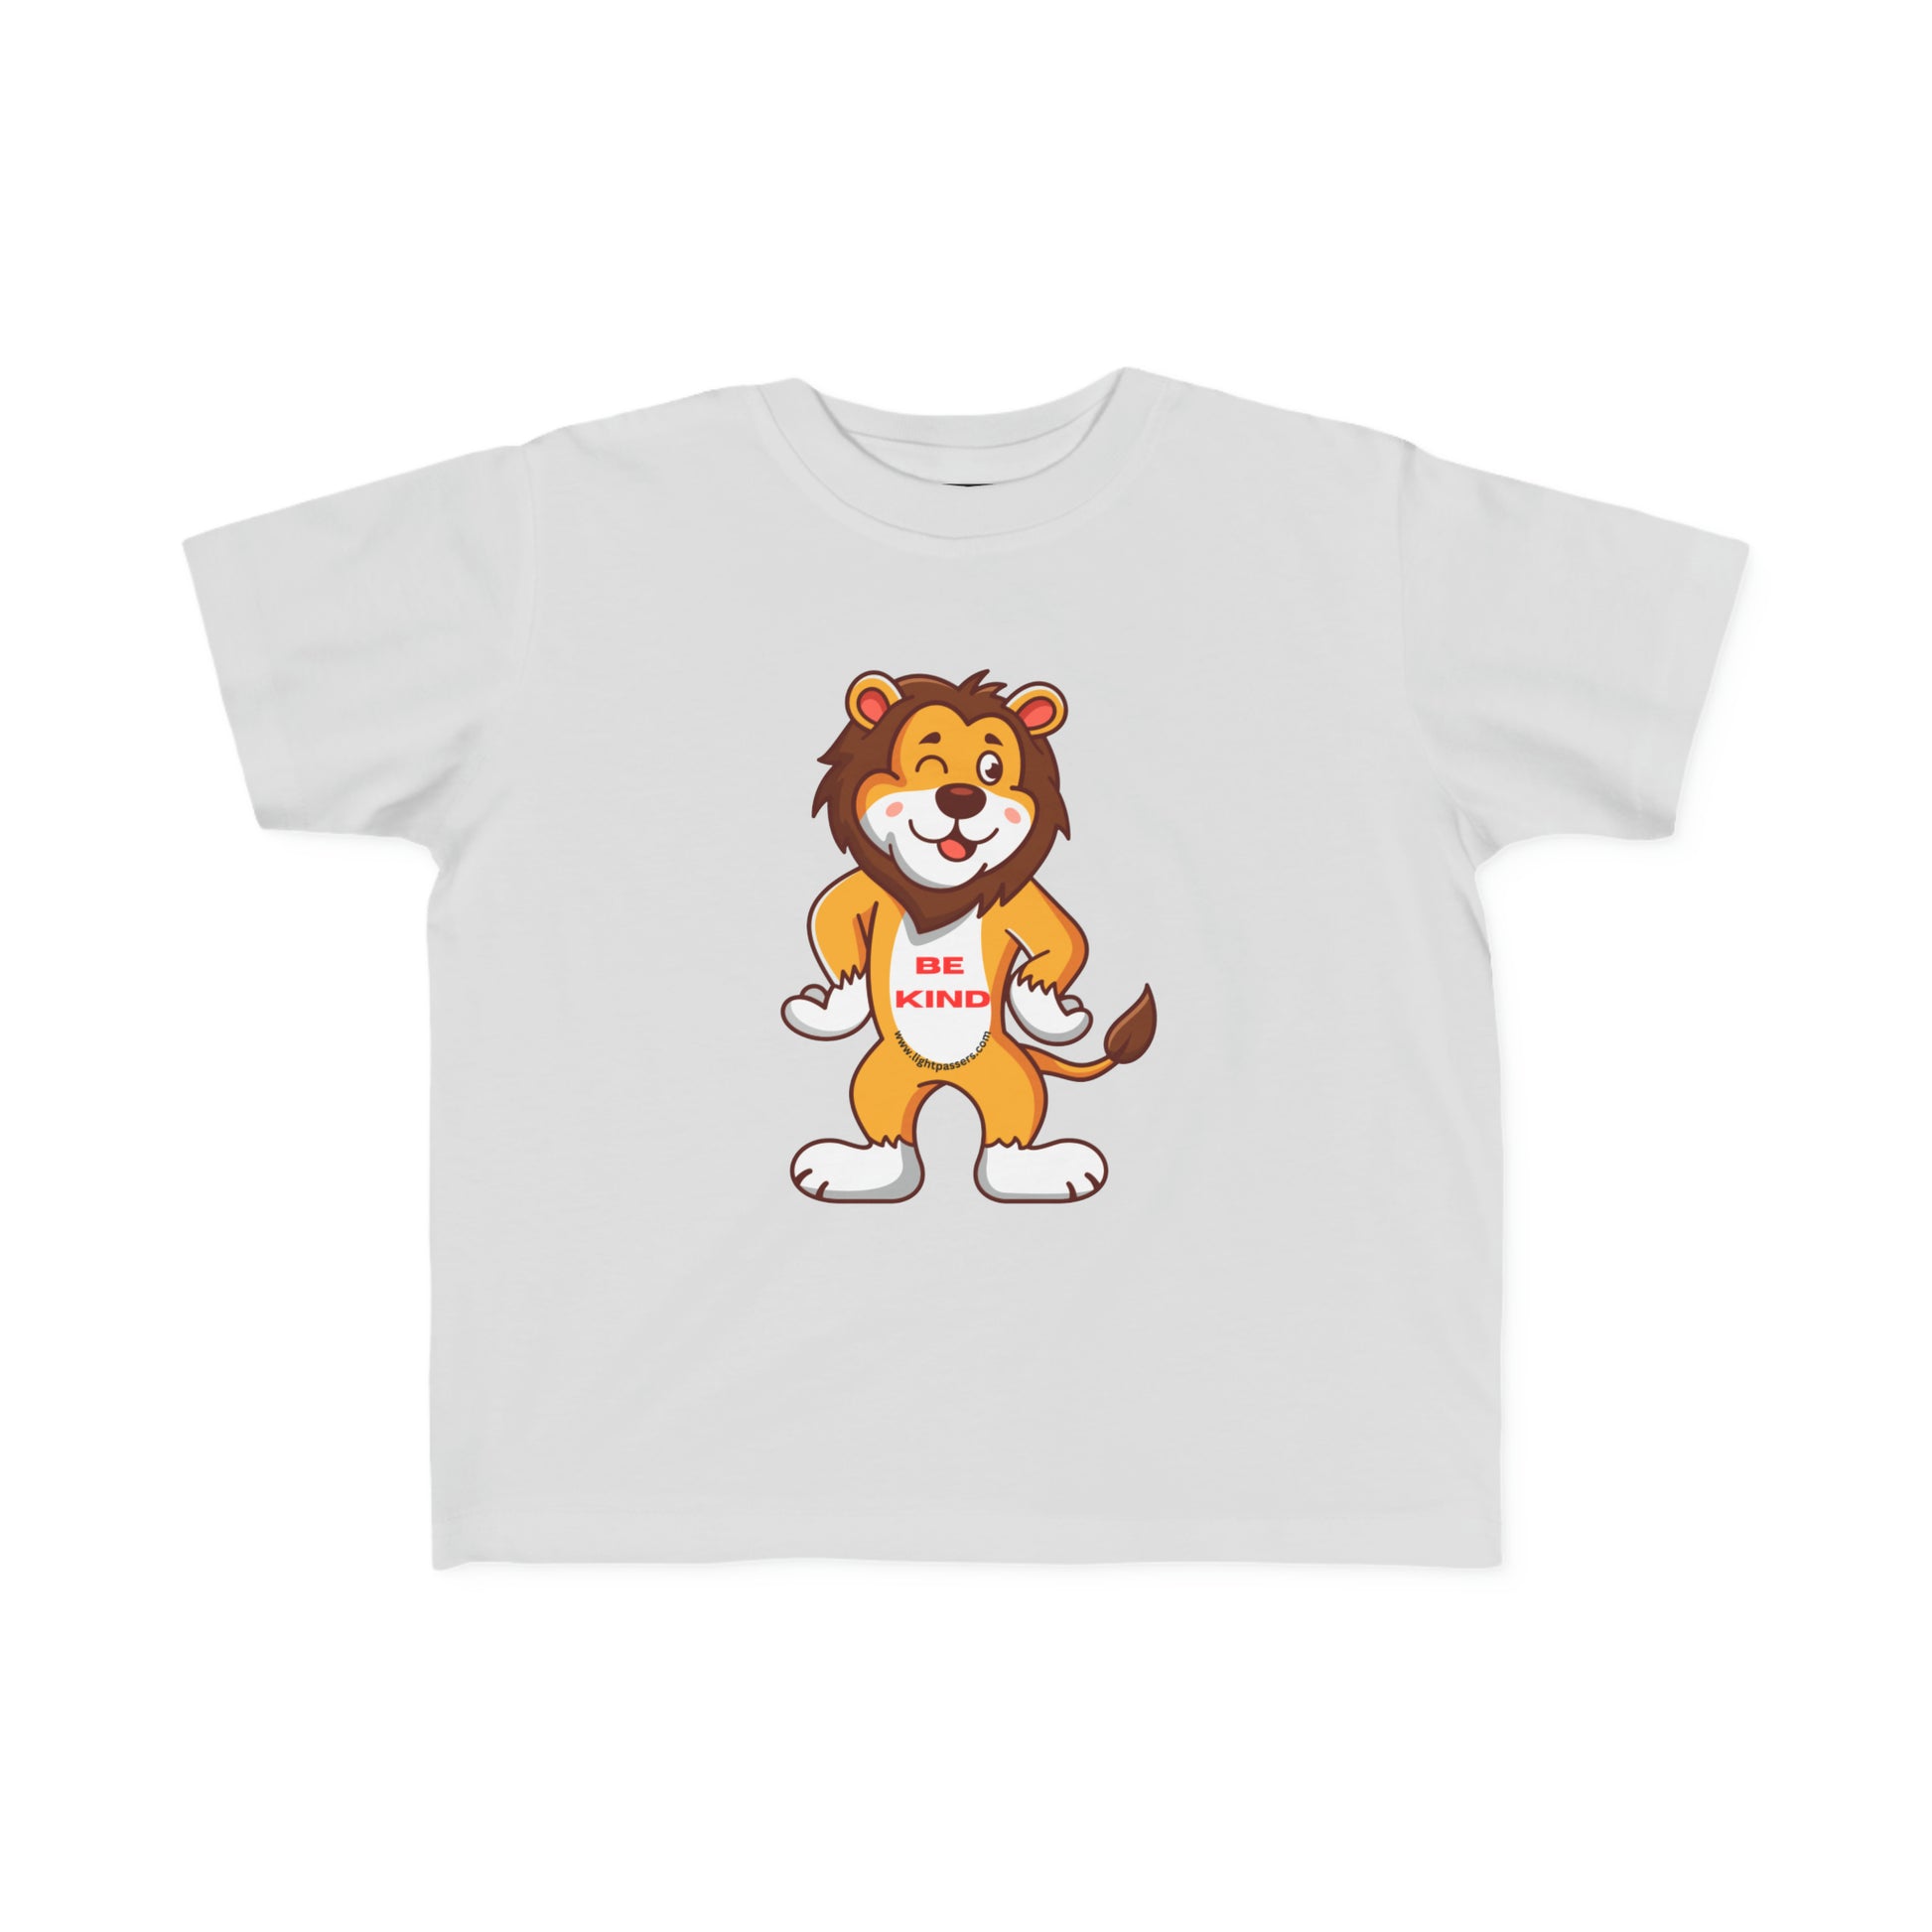 A white toddler t-shirt featuring a cartoon lion with a smile, perfect for sensitive skin. Made of 100% combed cotton, light fabric, tear-away label, and a durable print.